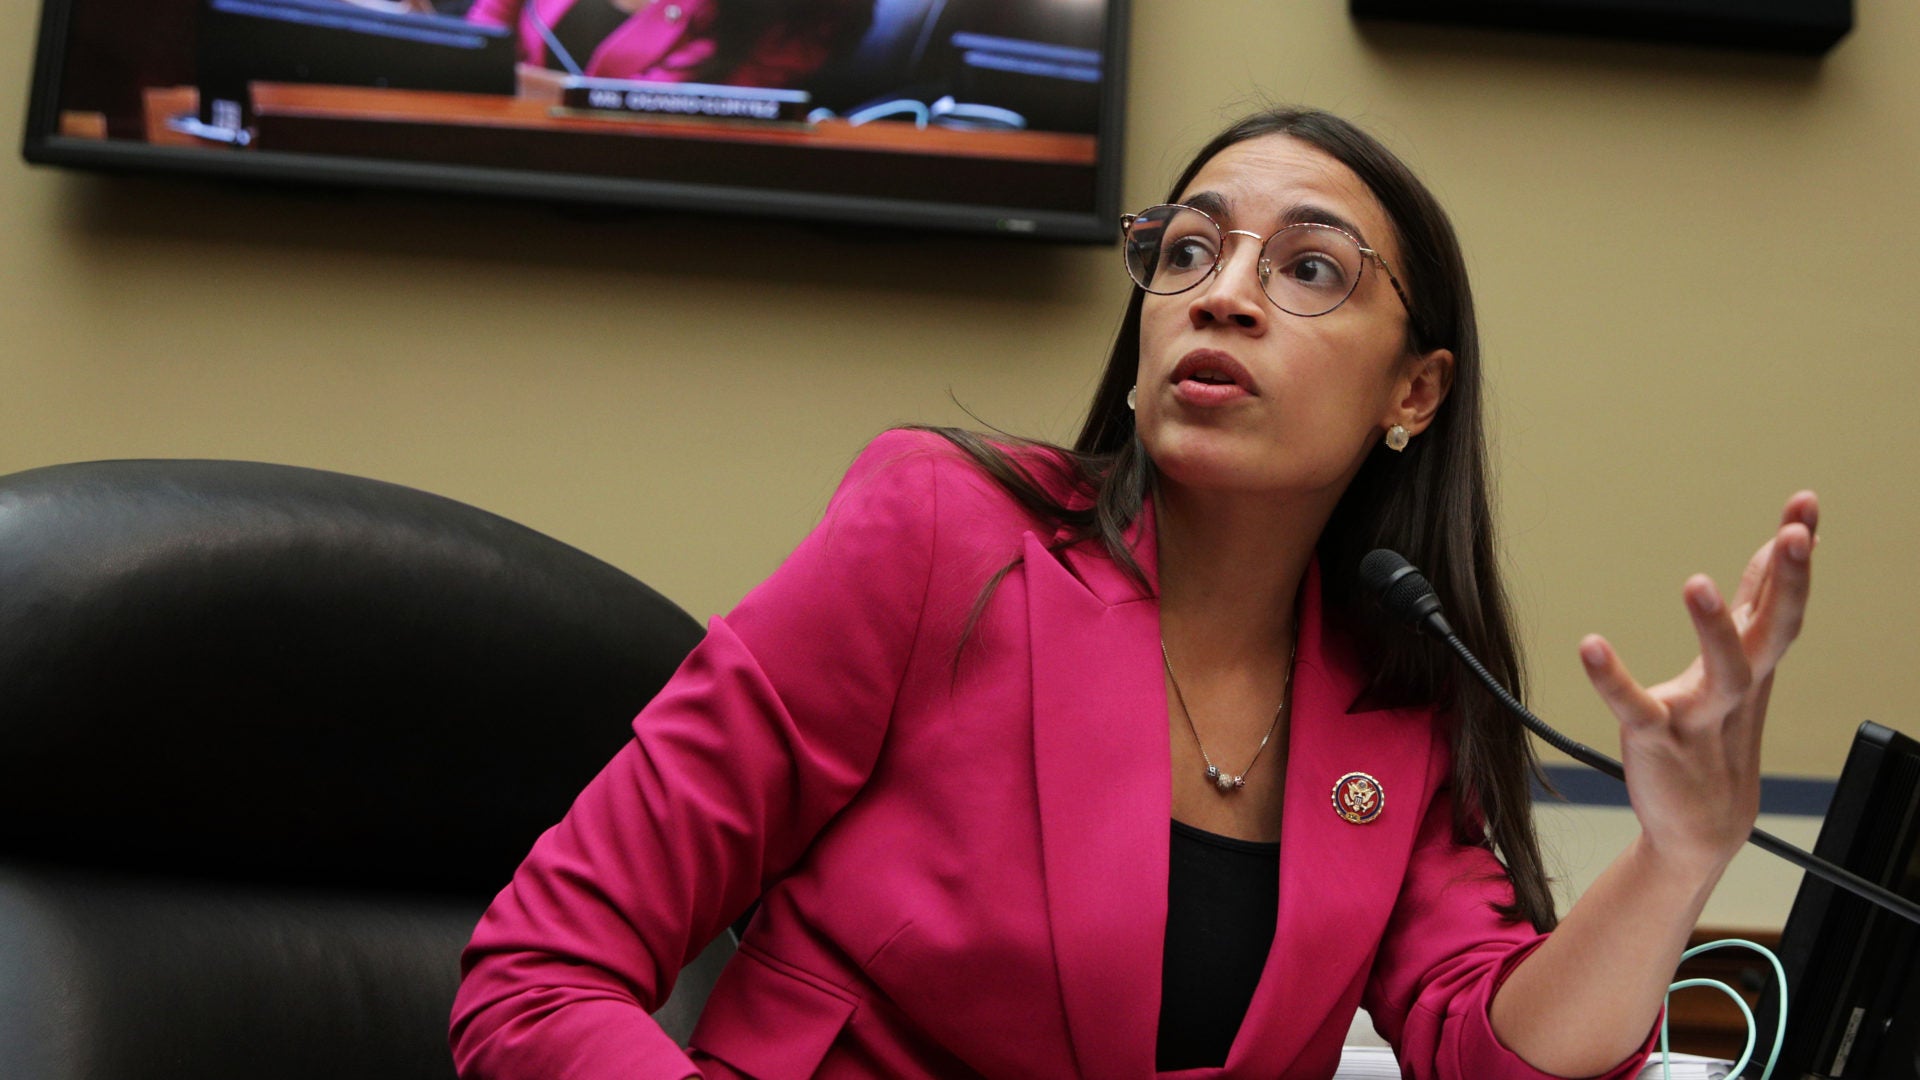 Ocasio-Cortez On Trump Food Stamp Cuts: 'If This Happened Then, We Might’ve Just Starved'